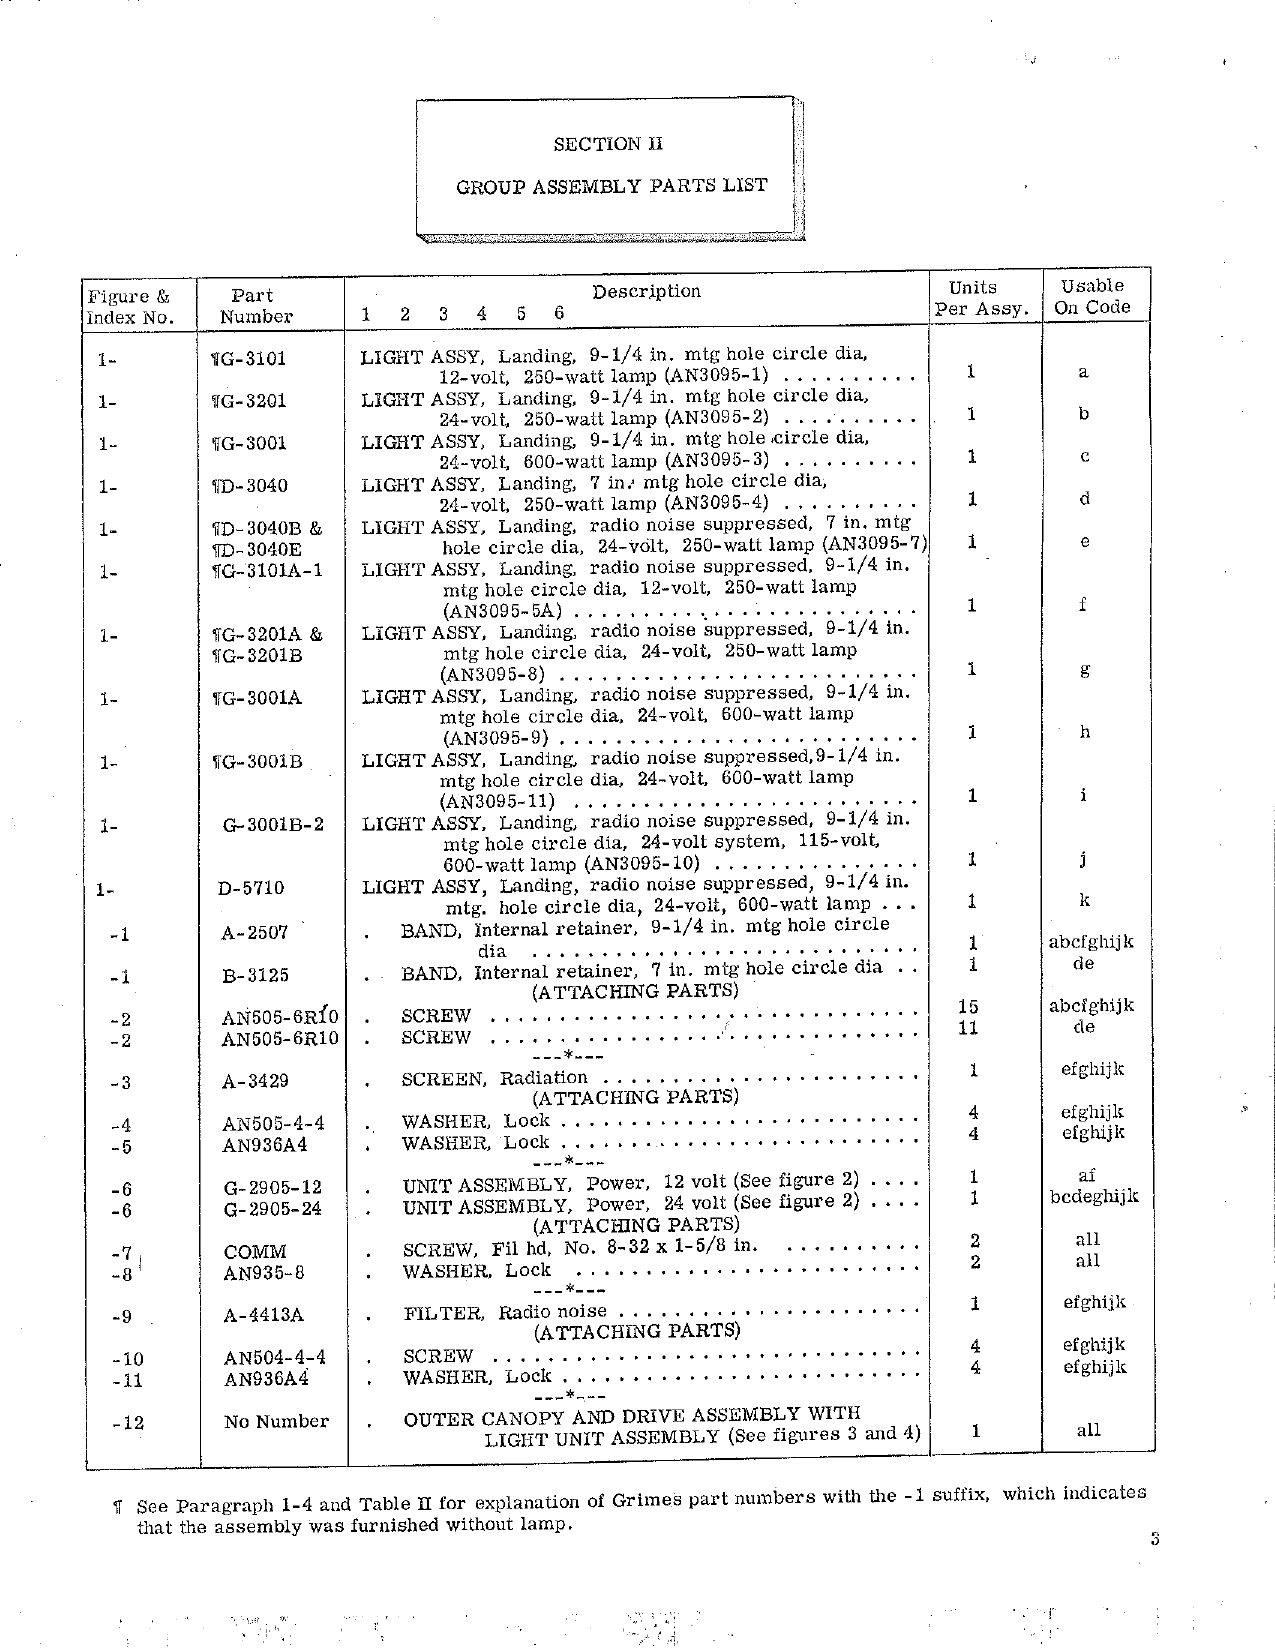 Sample page 5 from AirCorps Library document: Illustrated Parts Breakdown for Electrically Retractable Landing Light Assembly - Types AN3095 - Part D-5710